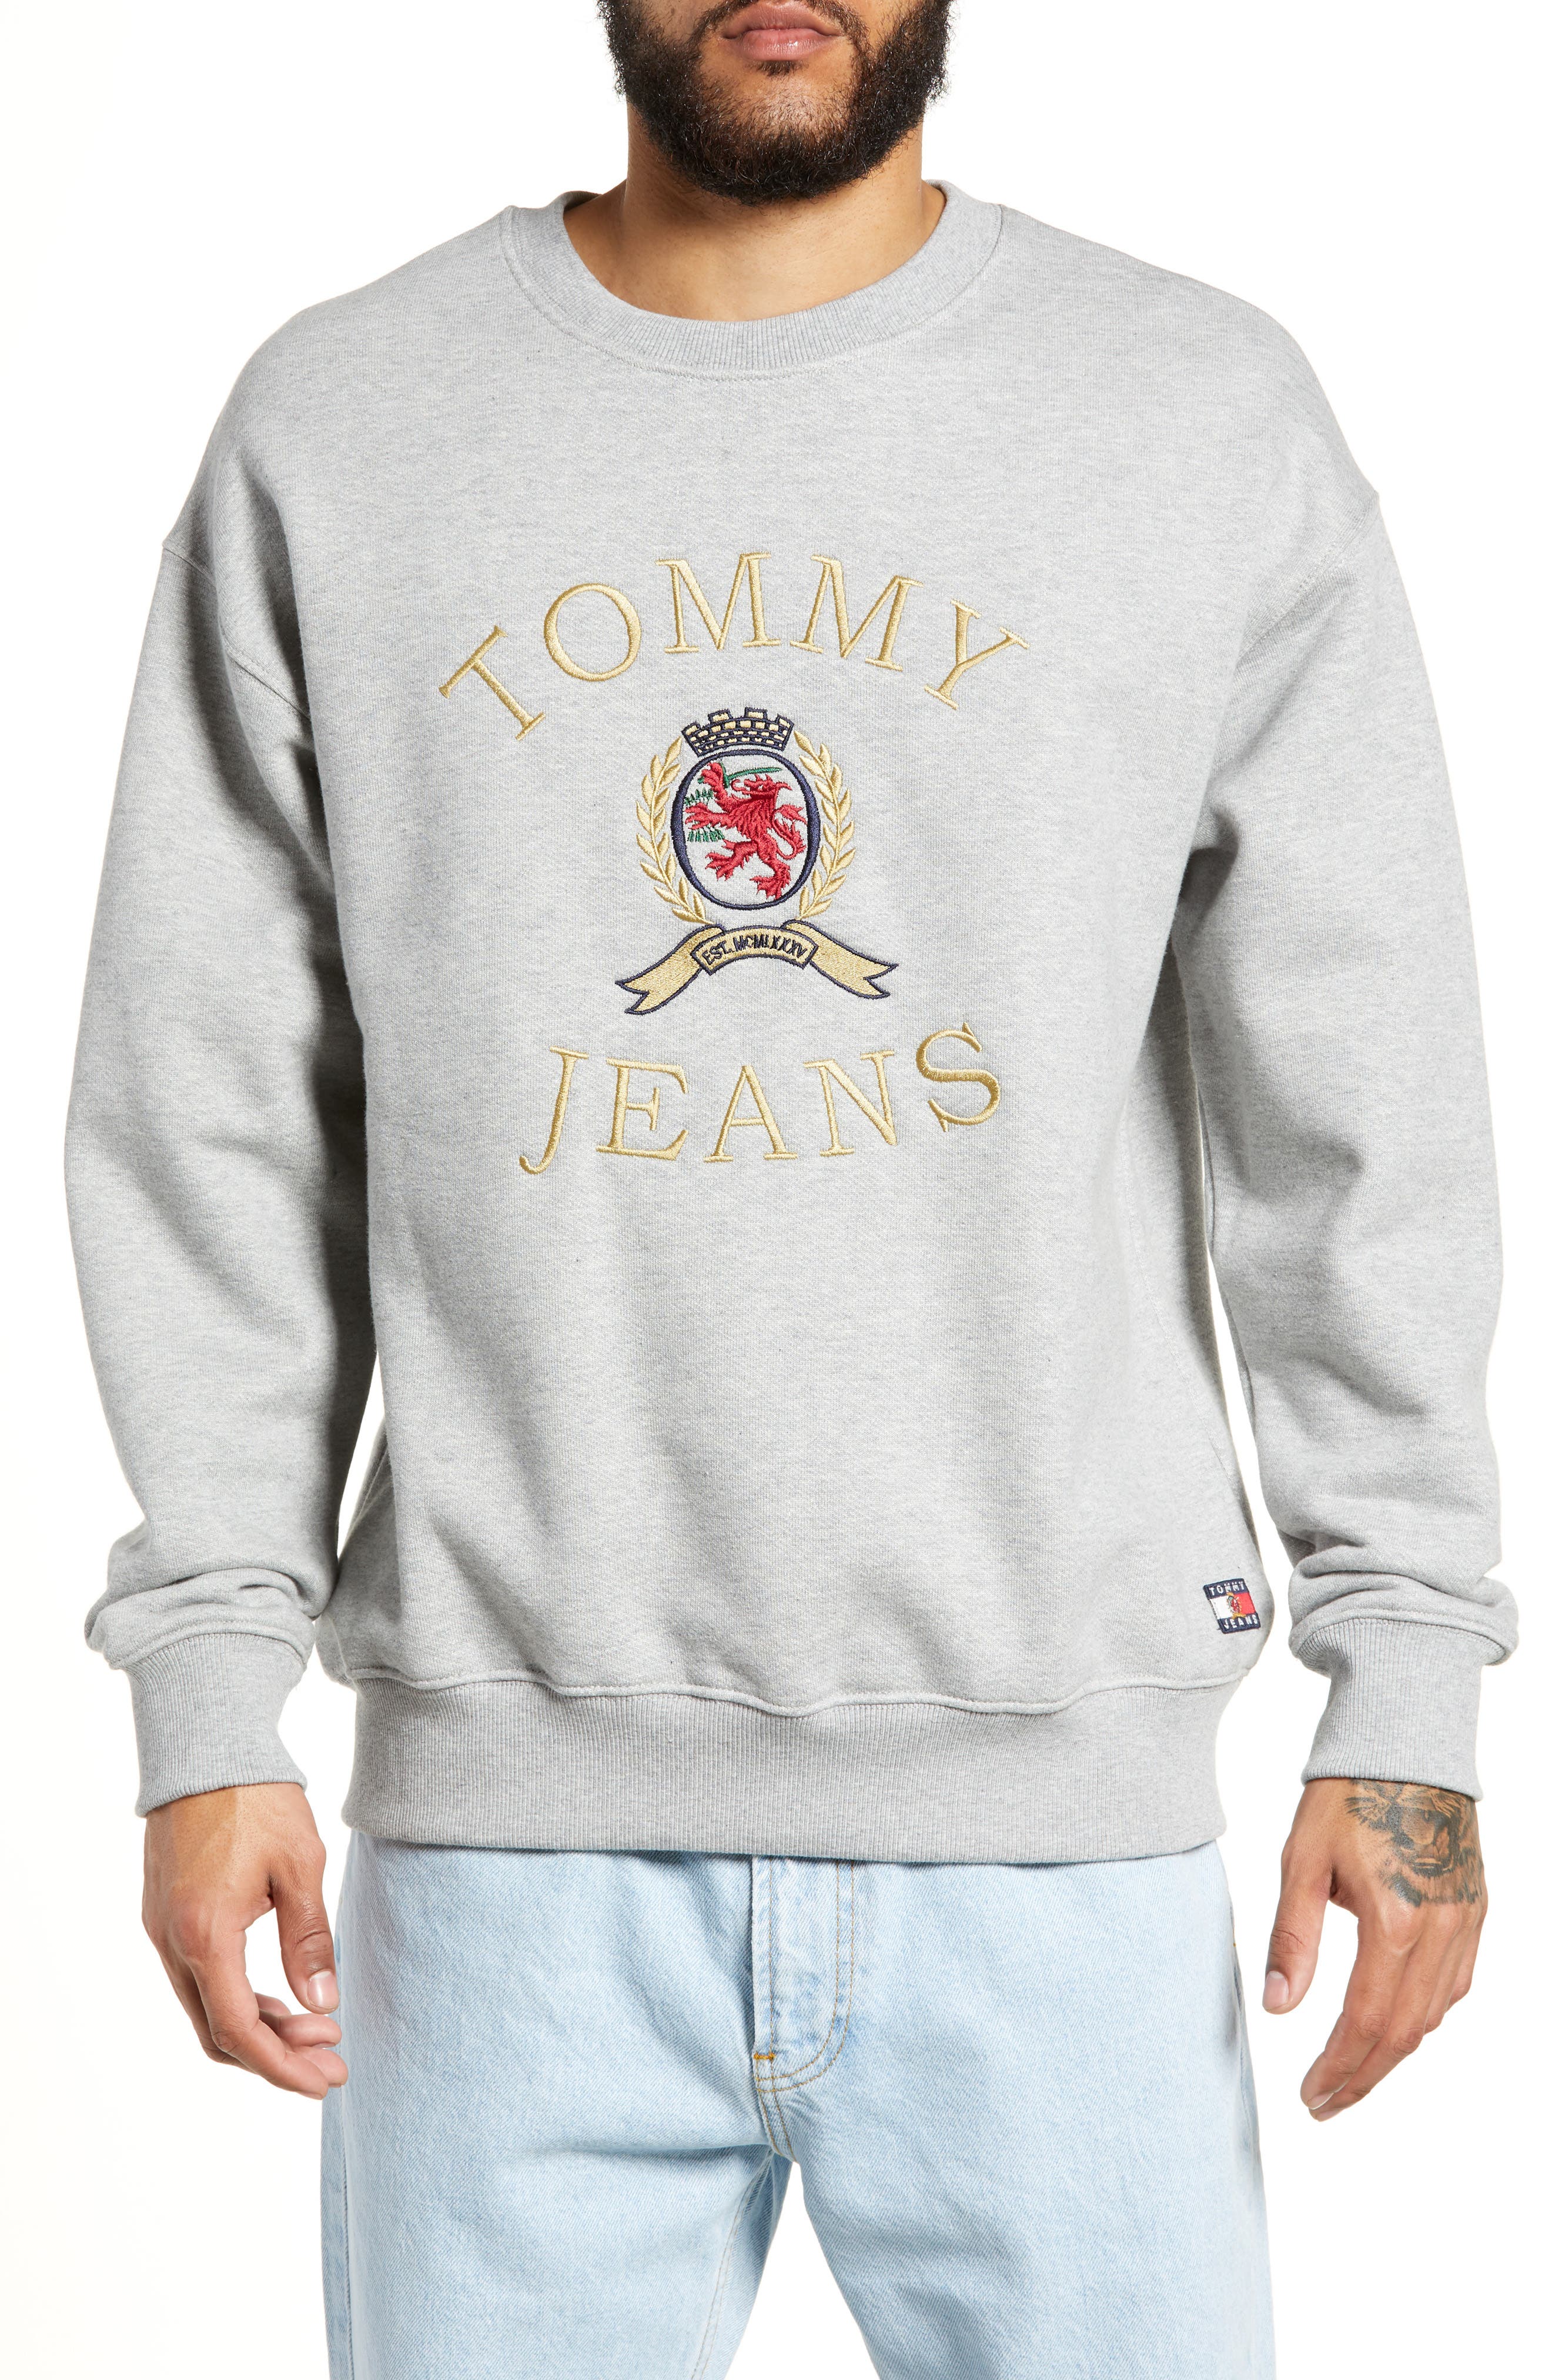 tommy jeans embroidered hoodie